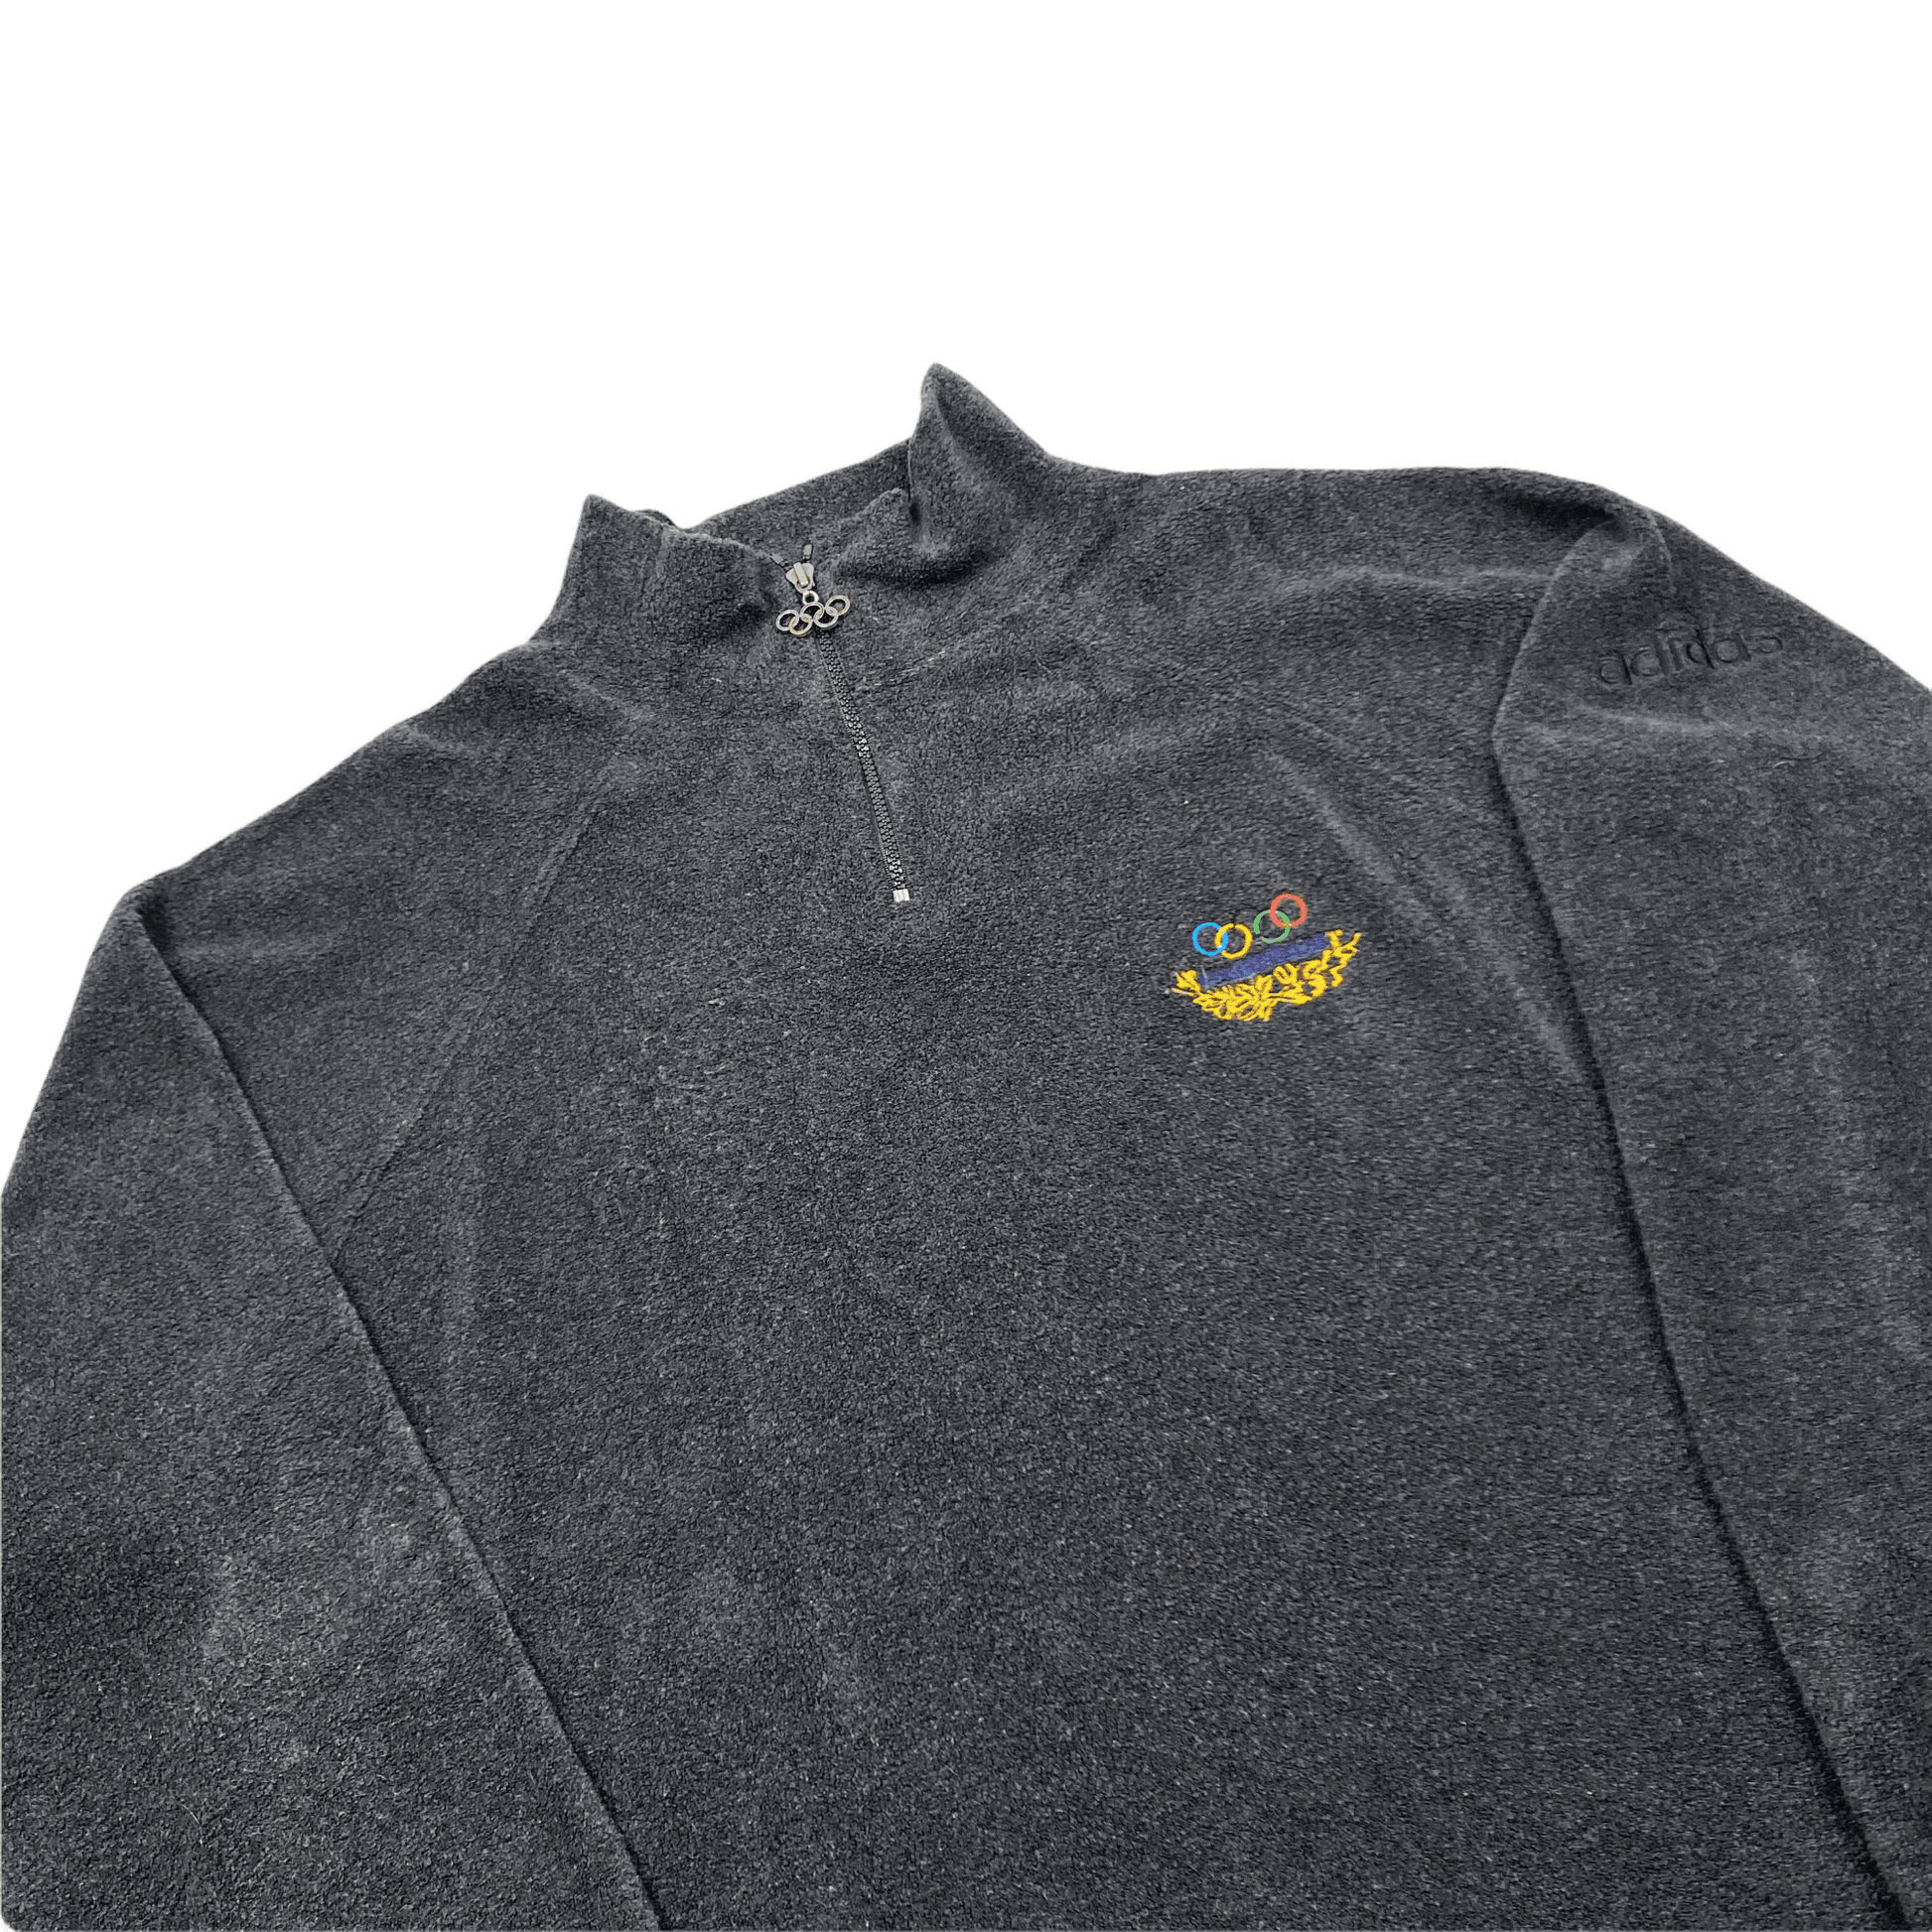 Vintage 90s Grey Adidas Olympic Collection Spell-Out Quarter Zip Fleece - Large (Recommended Size - Extra Large) - The Streetwear Studio